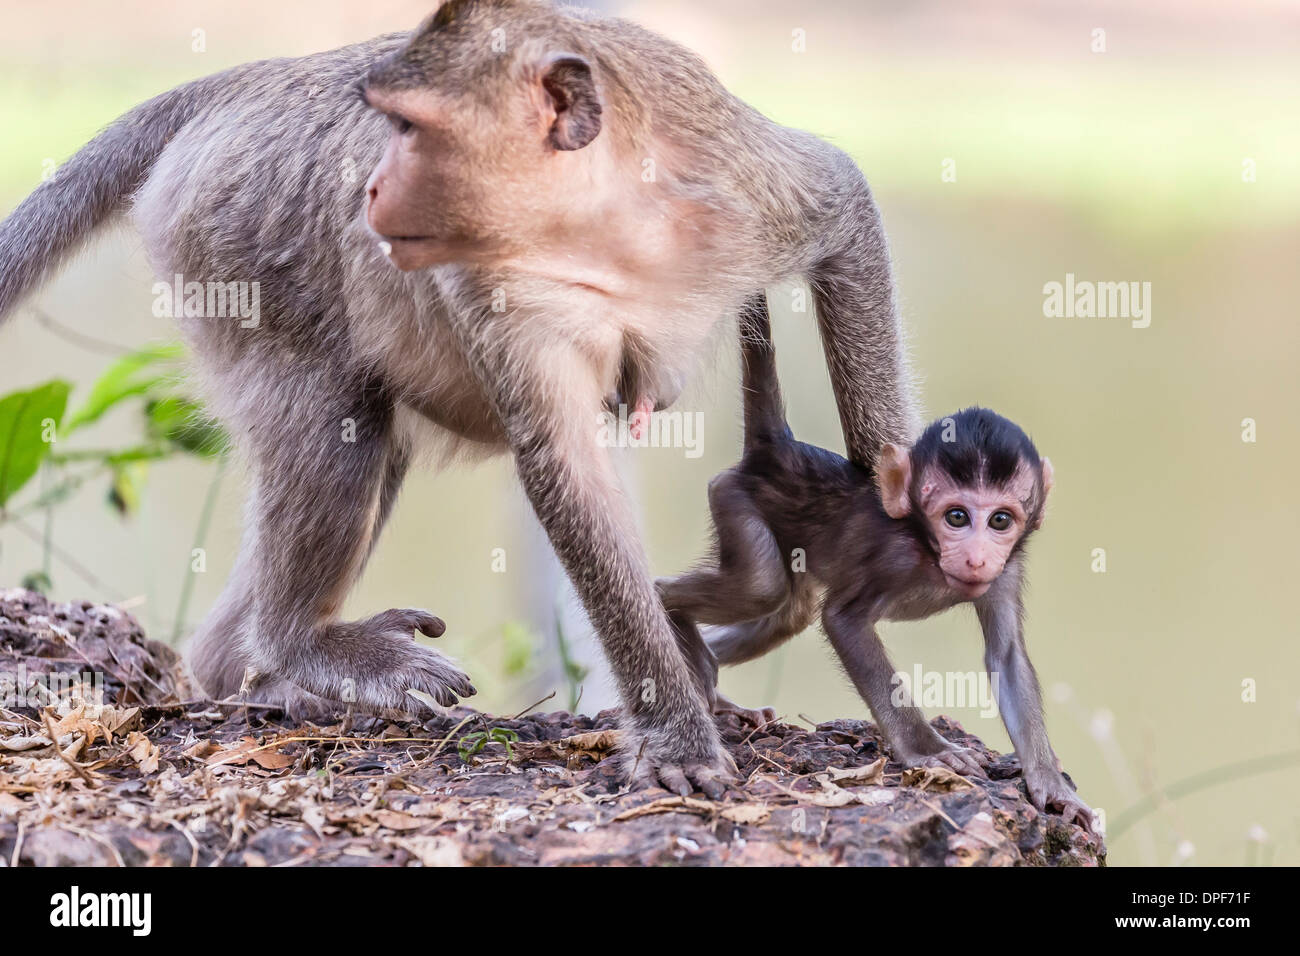 Young long-tailed macaque (Macaca fascicularis) under its mother in Angkor Thom, Siem Reap, Cambodia, Indochina, Southeast Asia Stock Photo